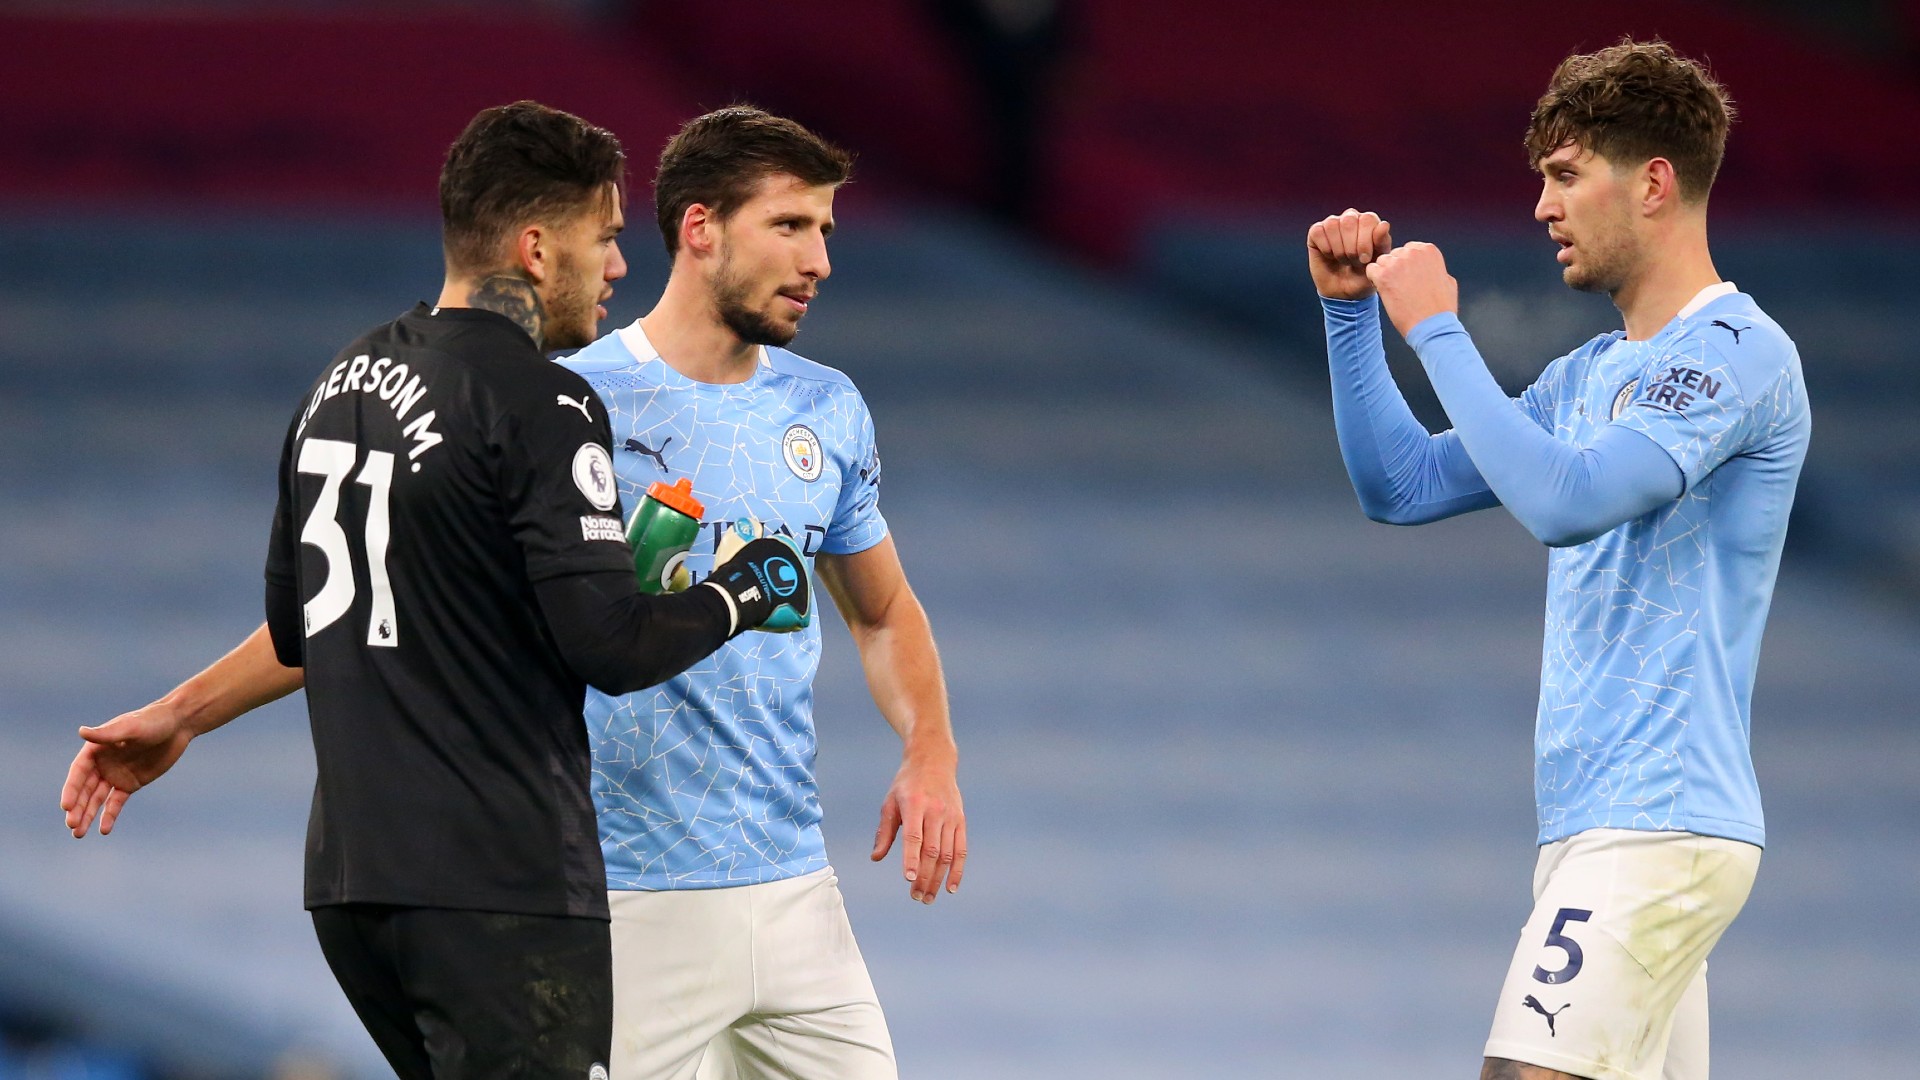 'I absolutely love playing with Dias' - Stones hails Manchester City team-mate following return to form